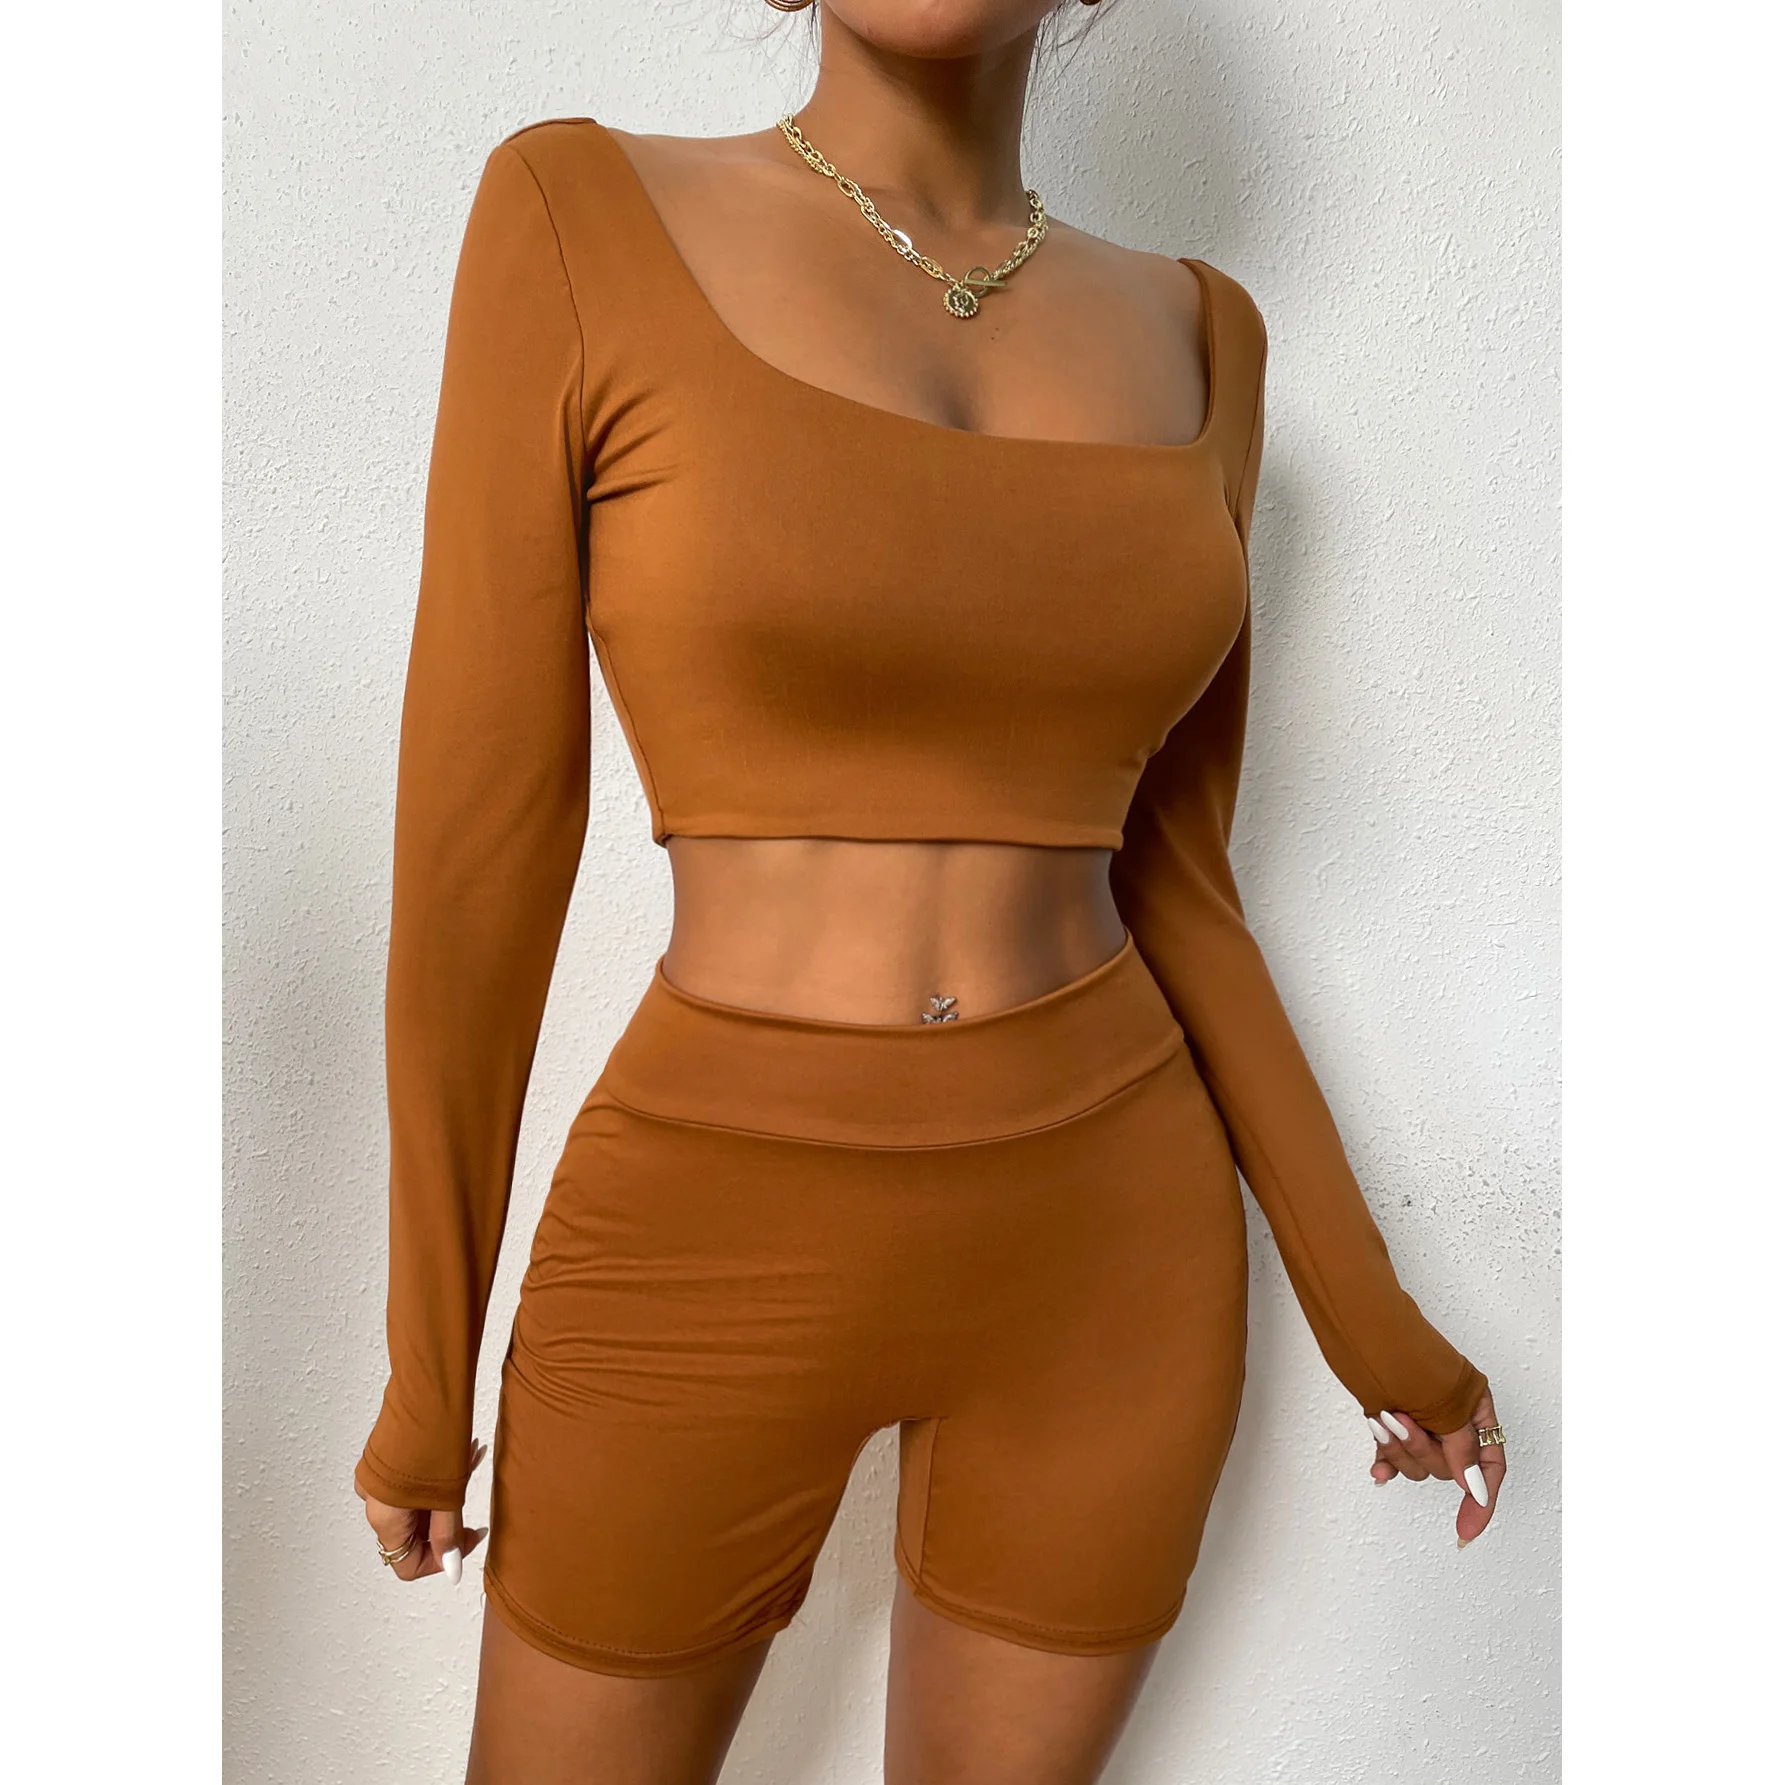 

Discount two piece set street wear sexy lady style new elegant fashion casual daily life suit for women, Picture shows